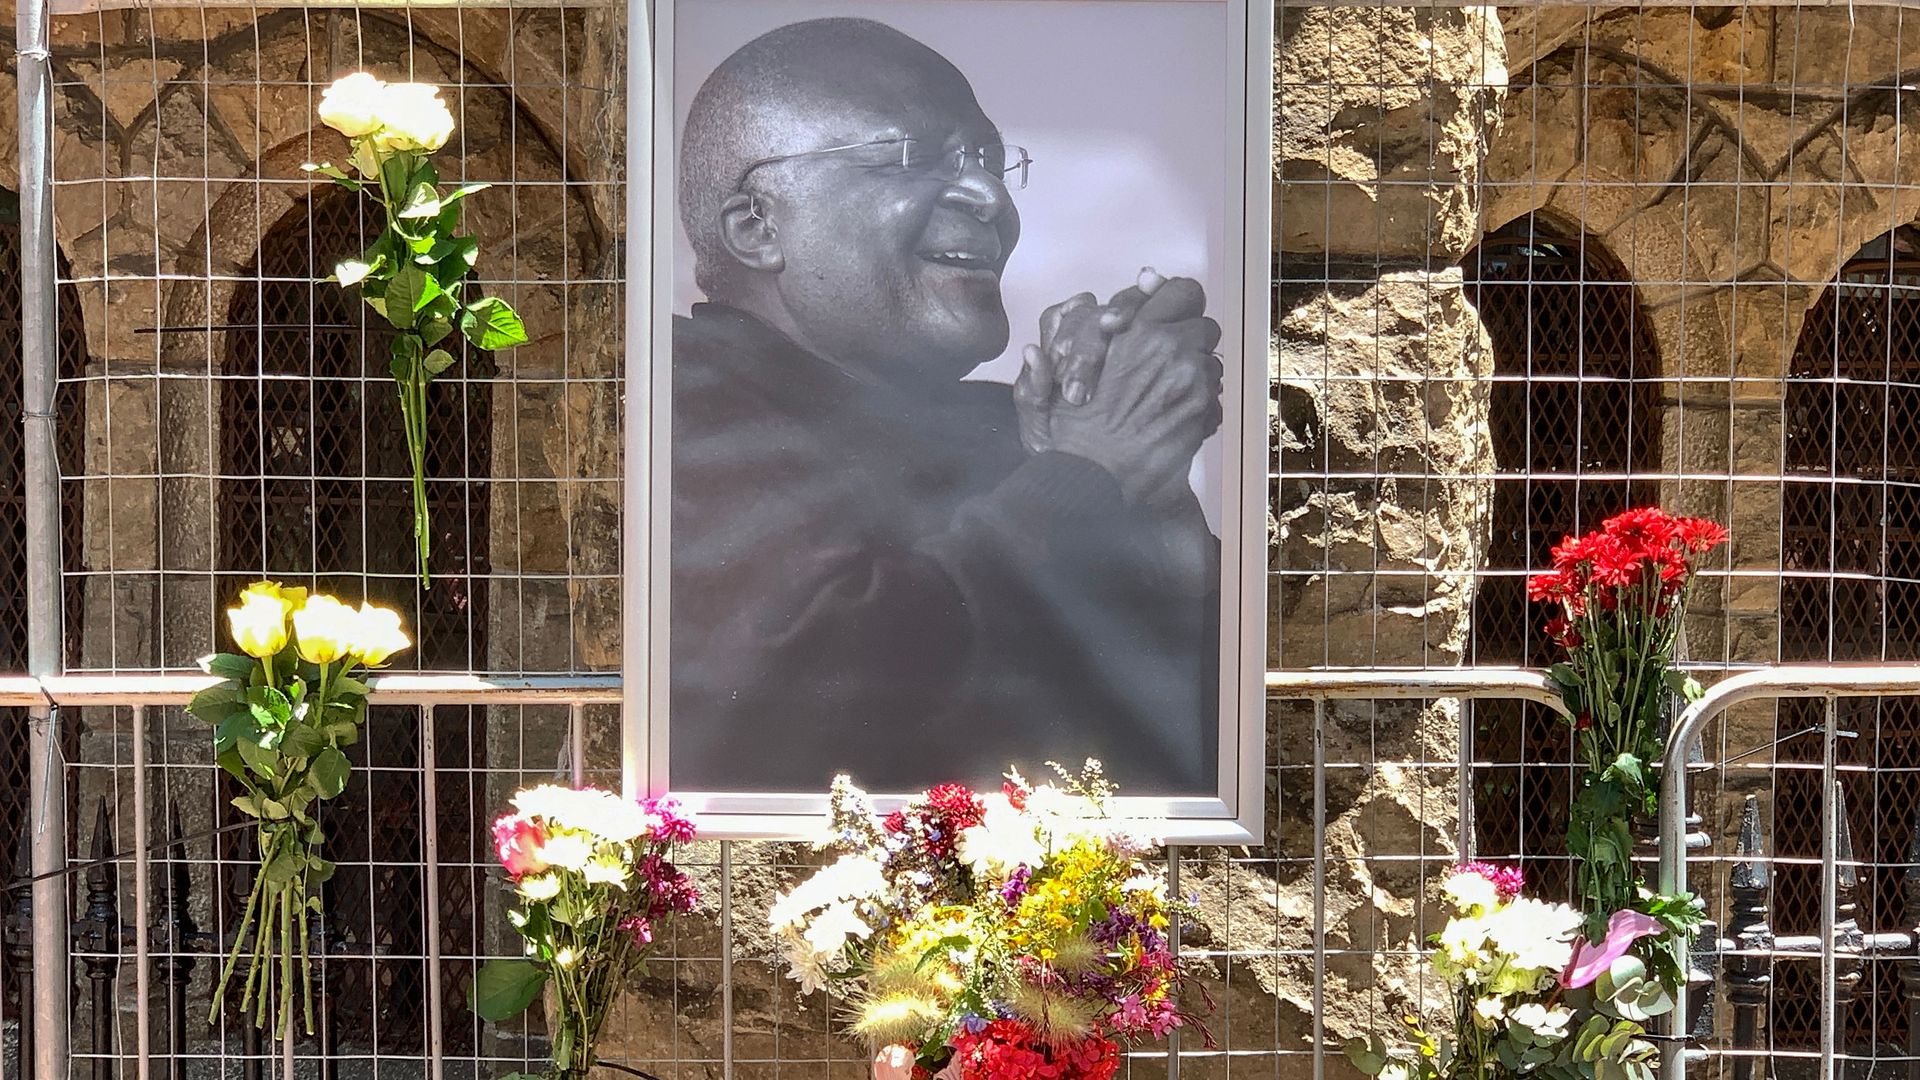 lowers are seen next to a portrait of South African anti-apartheid icon Desmond Tutu outside St. George's cathedral in Cape Town on December 26, 2021